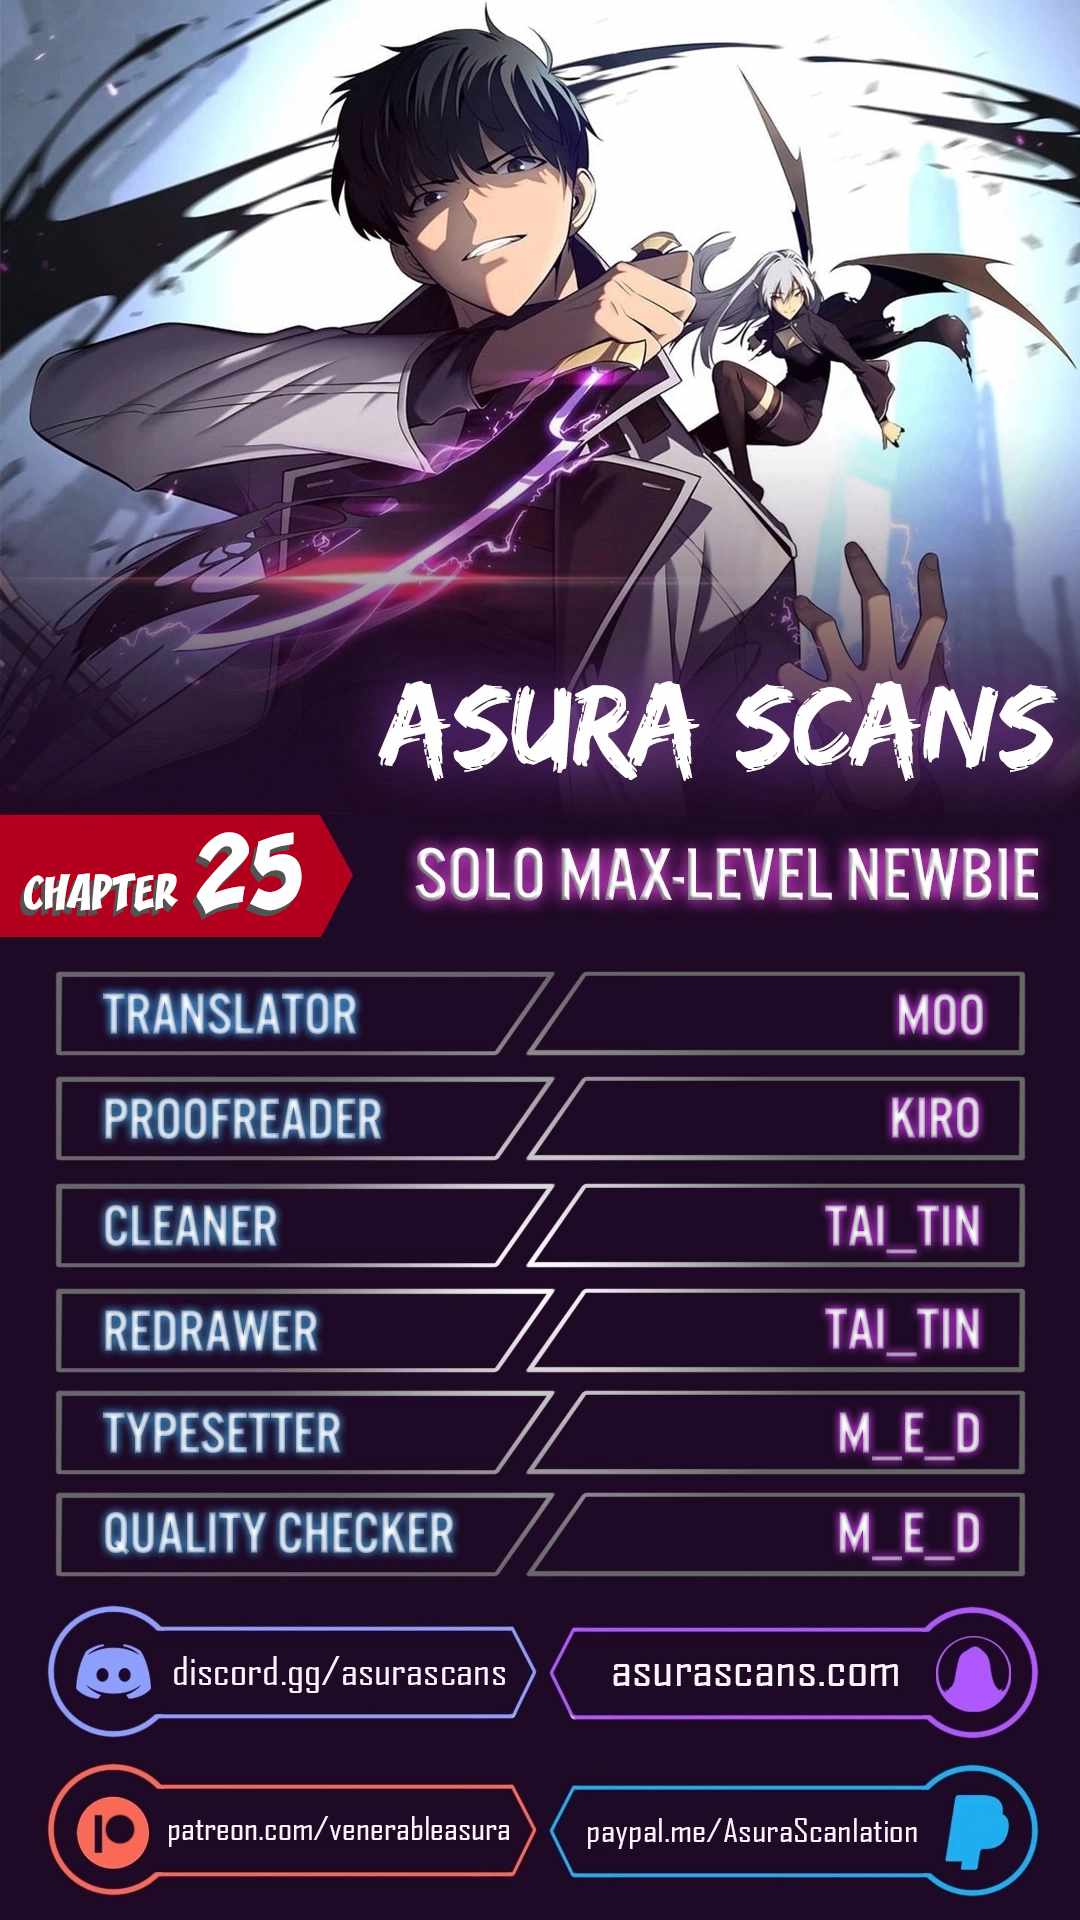 Solo Max-Level Newbie Chapter 25